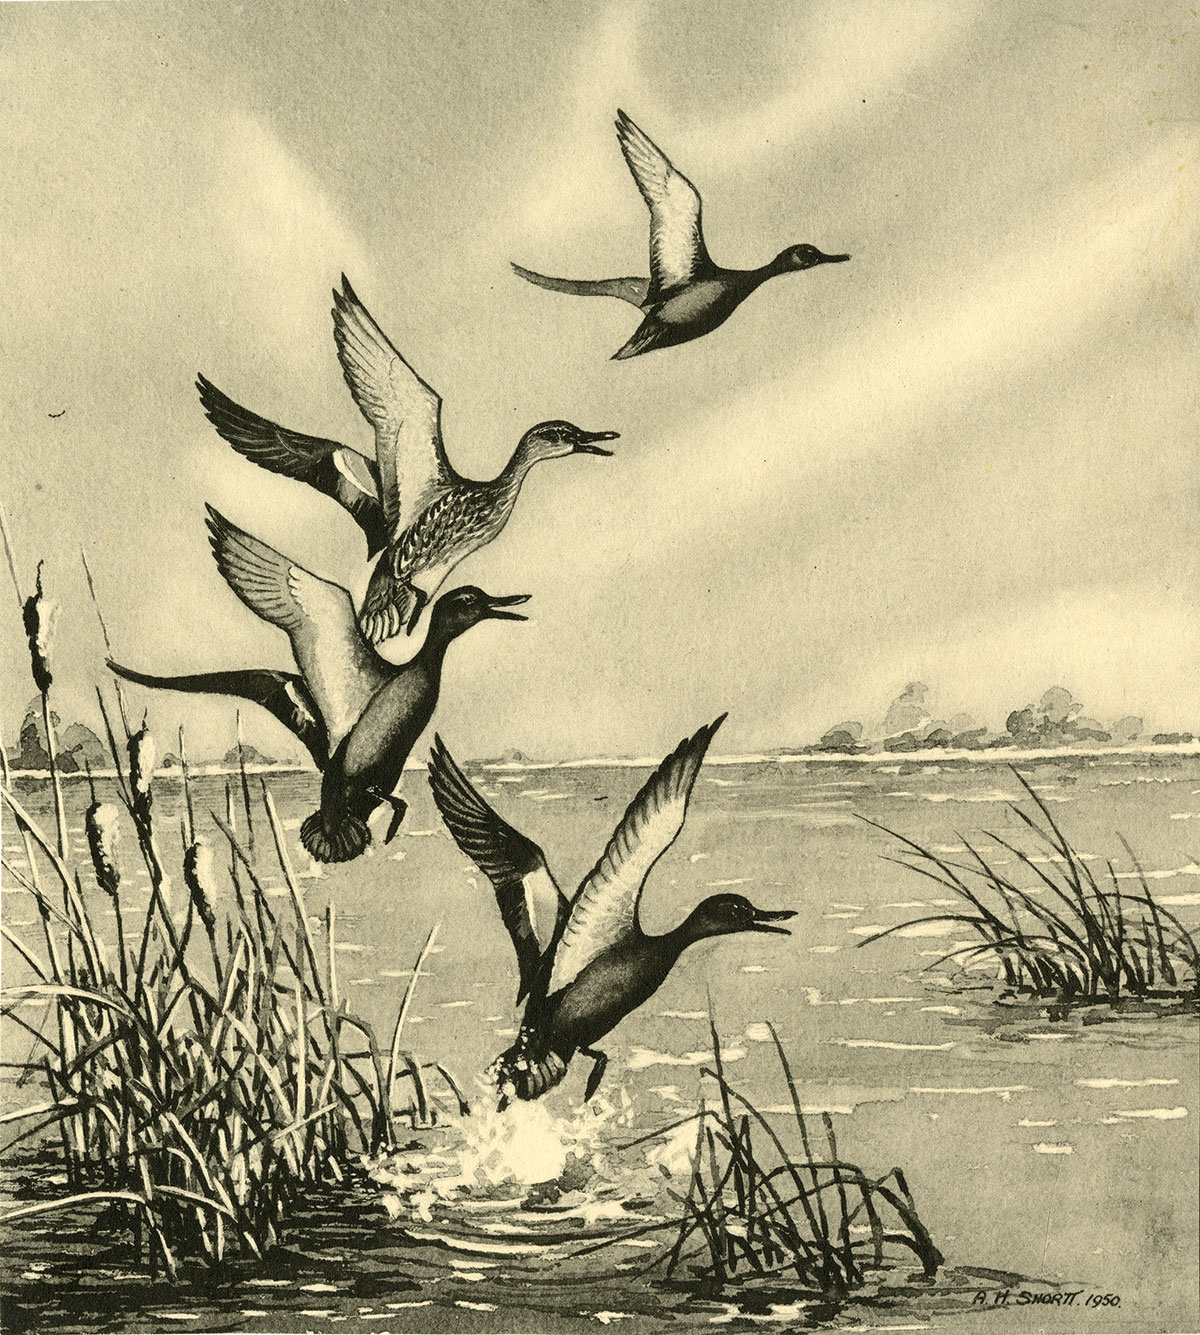 An illustration of ducks flying from a pond.